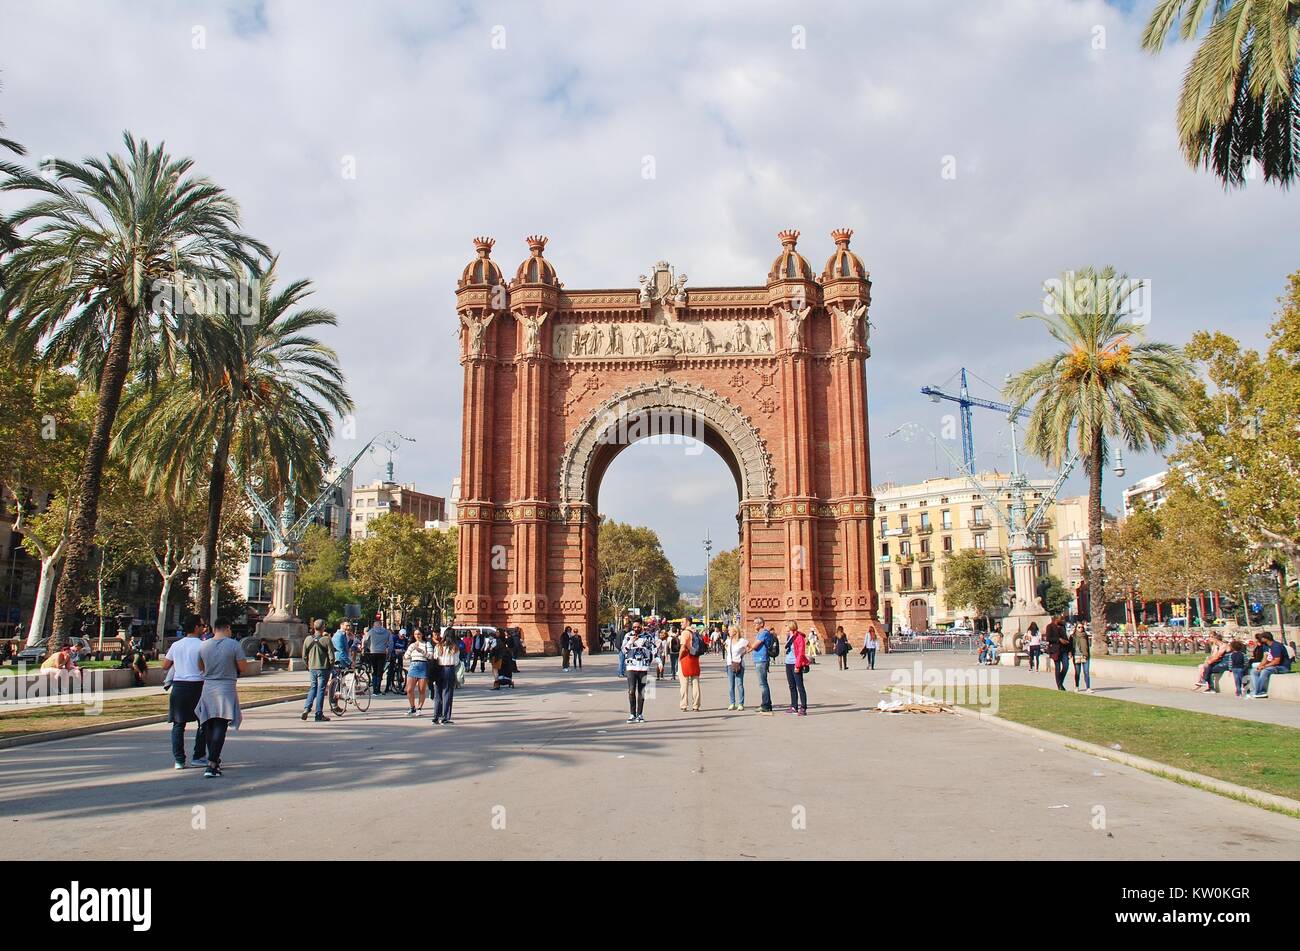 The historic Arc de Triomf in Barcelona, Spain on November 1, 2017. It was built in 1888 as the entrance to the Barcelona World Exposition. Stock Photo